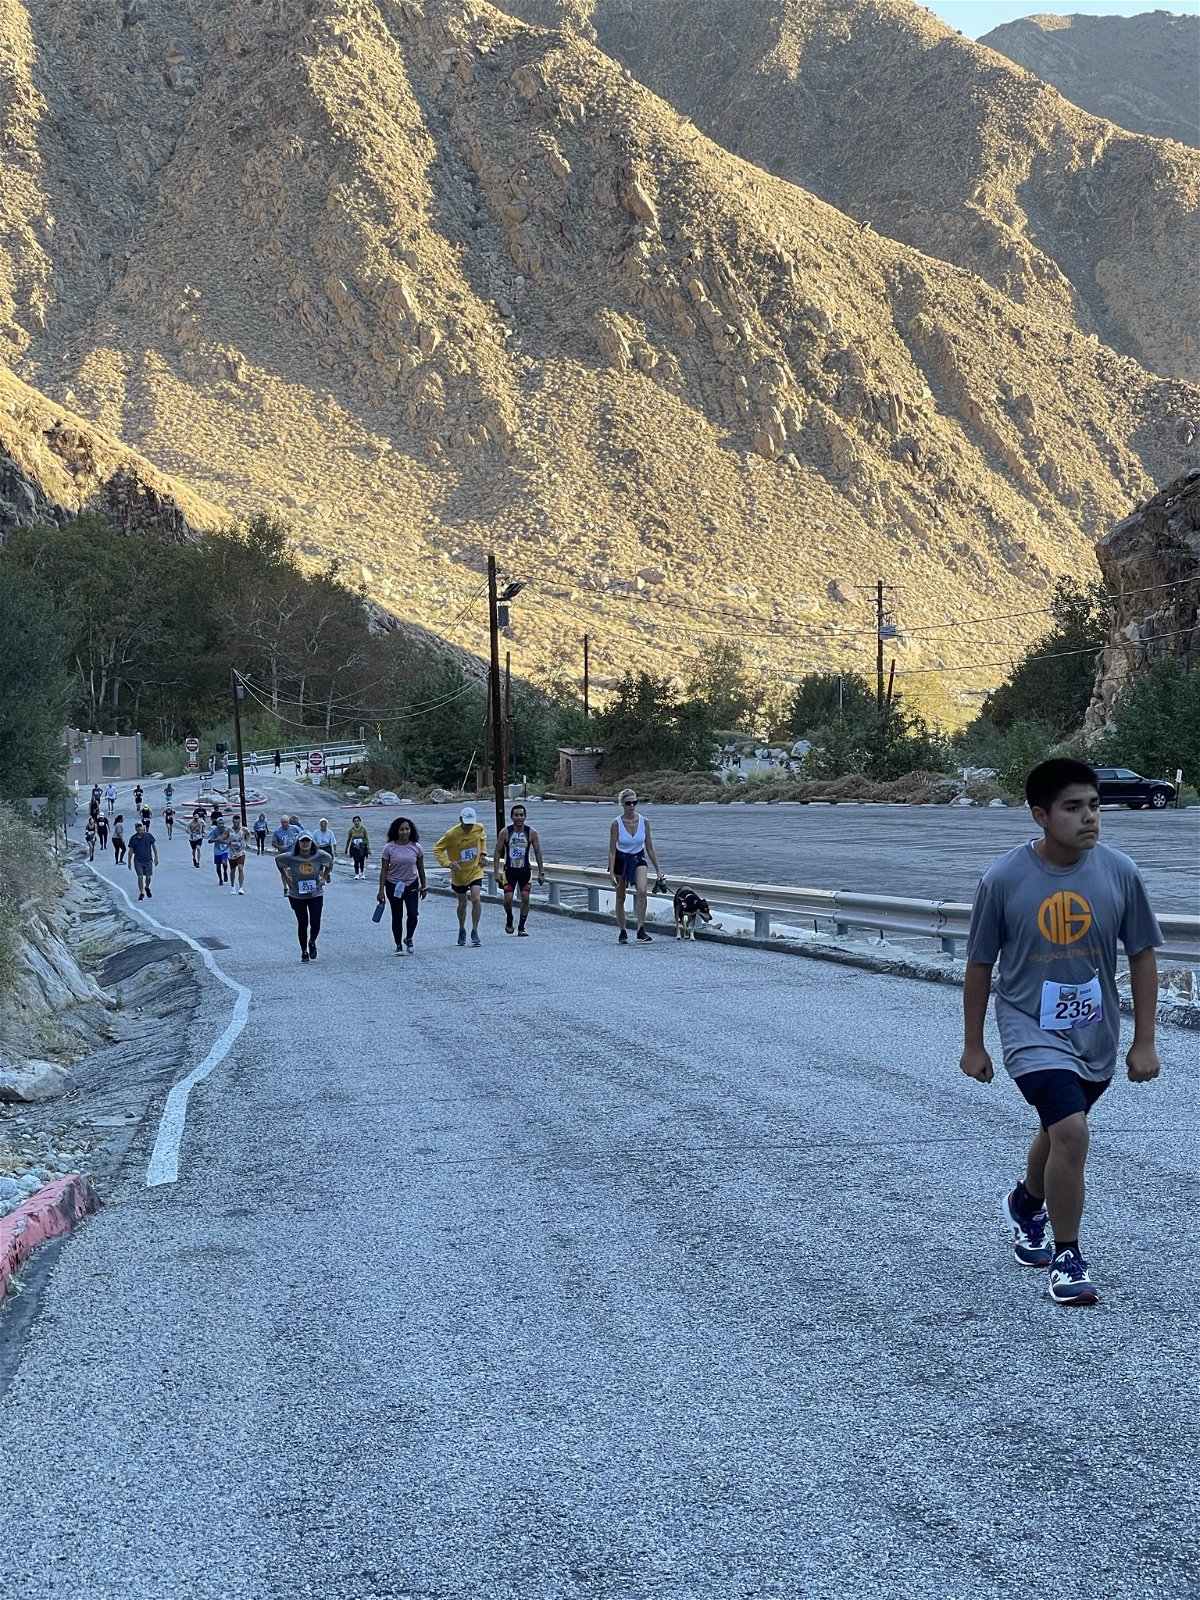 35TH ANNUAL TRAM ROAD CHALLENGE RESULTS – Palm Springs Aerial Tramway